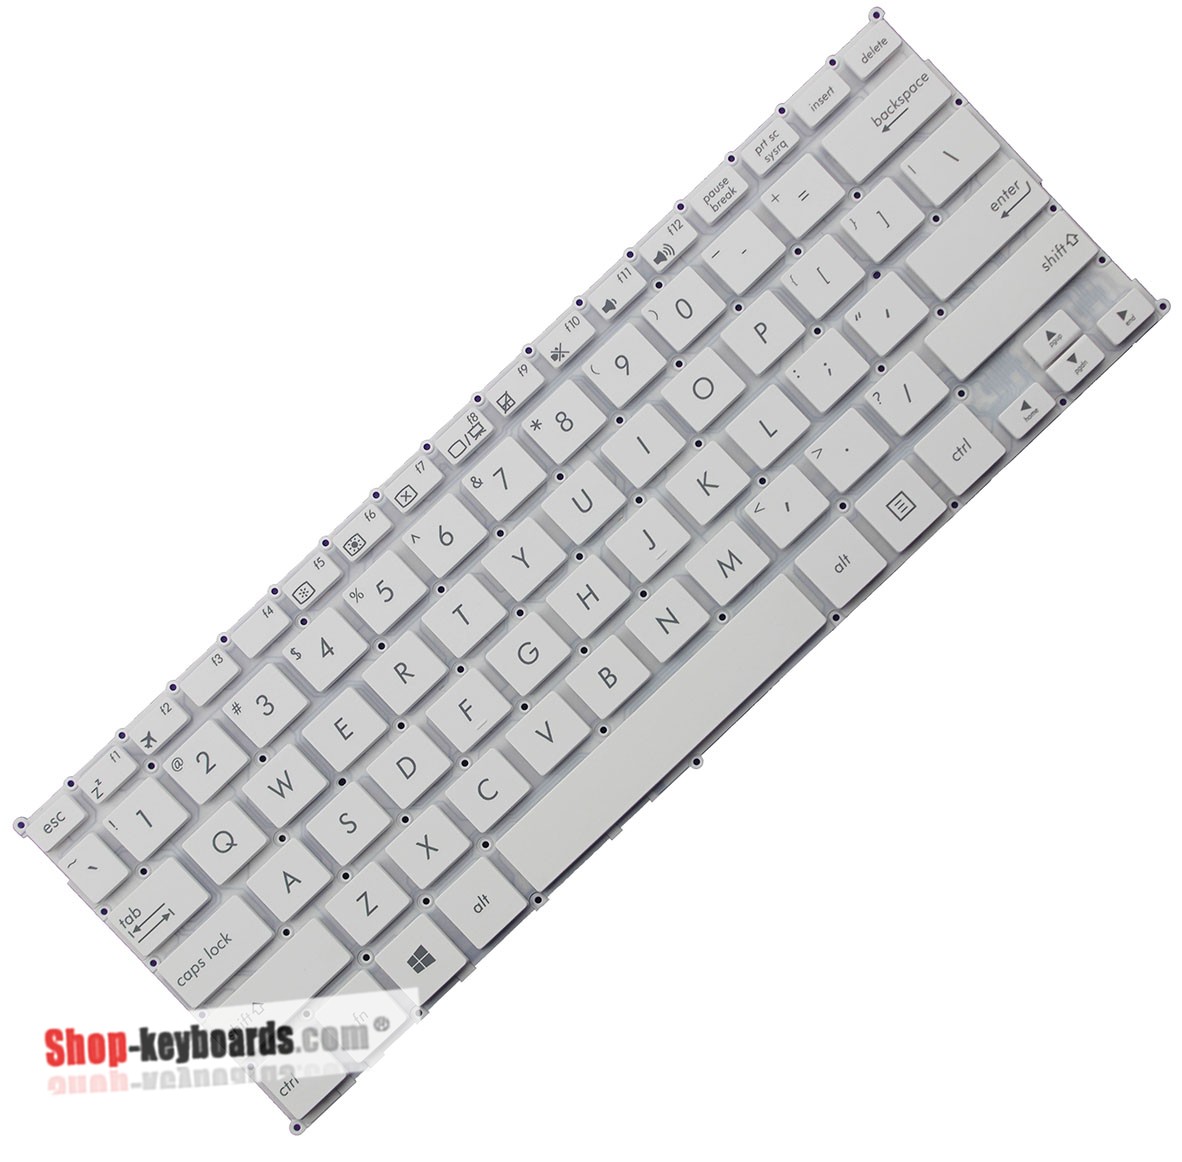 Asus 0KNL0-1123AR00 Keyboard replacement